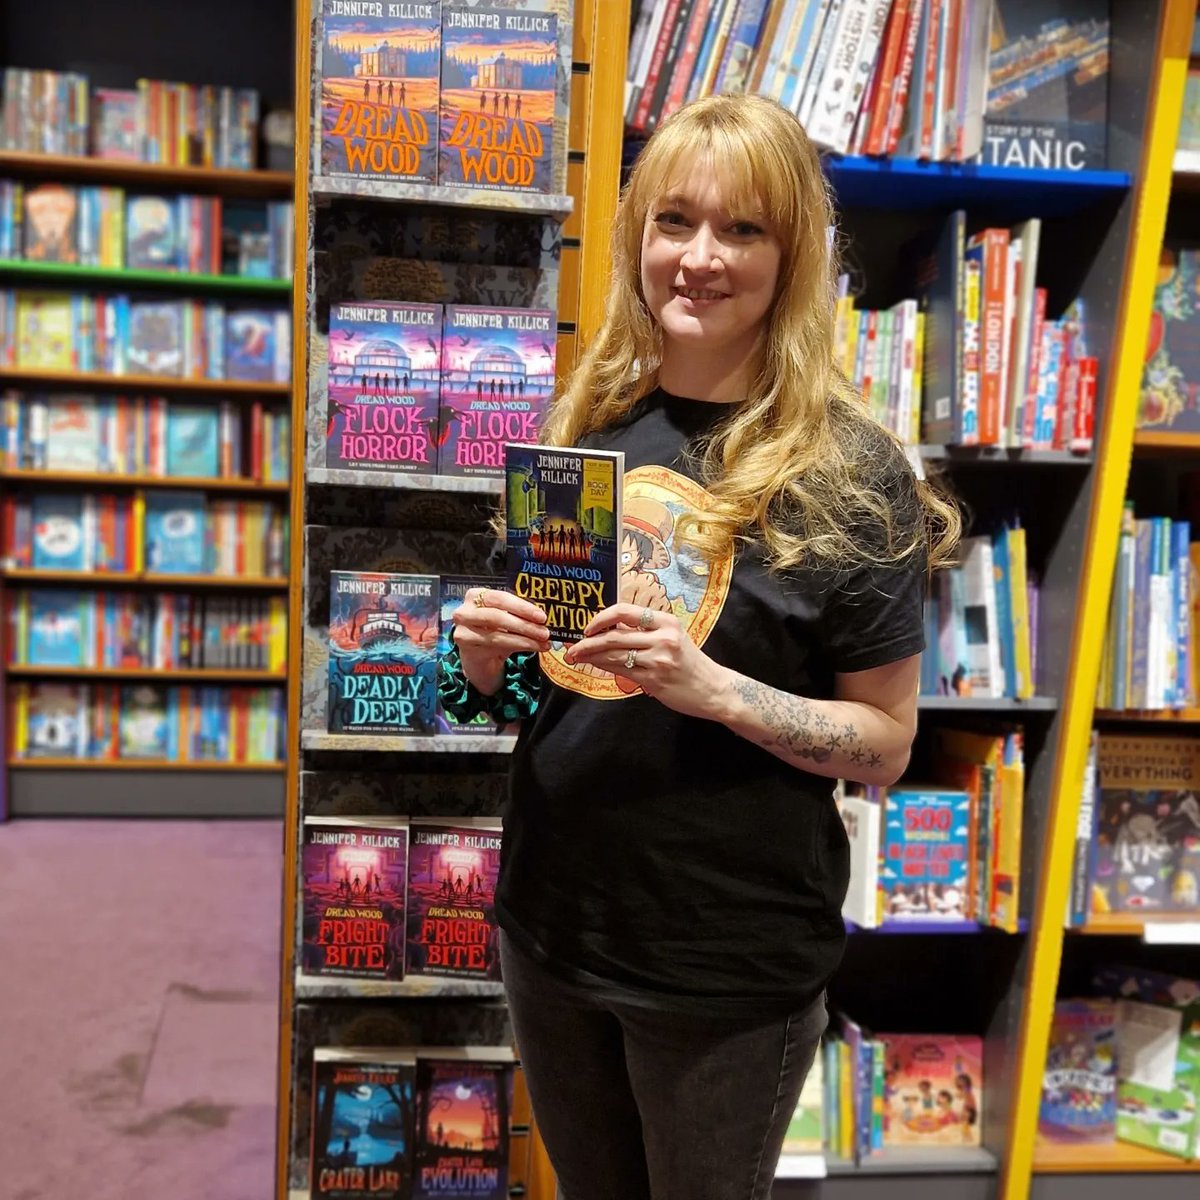 It's scary how much fun we had with @JenniferKillick celebrating #worldbookday2024, hearing all about the inspiration behind her books & creating our own monster. 🪳🕷🪱 We've sold out of her world book day title but have plenty of her other series in stock & signed, too!